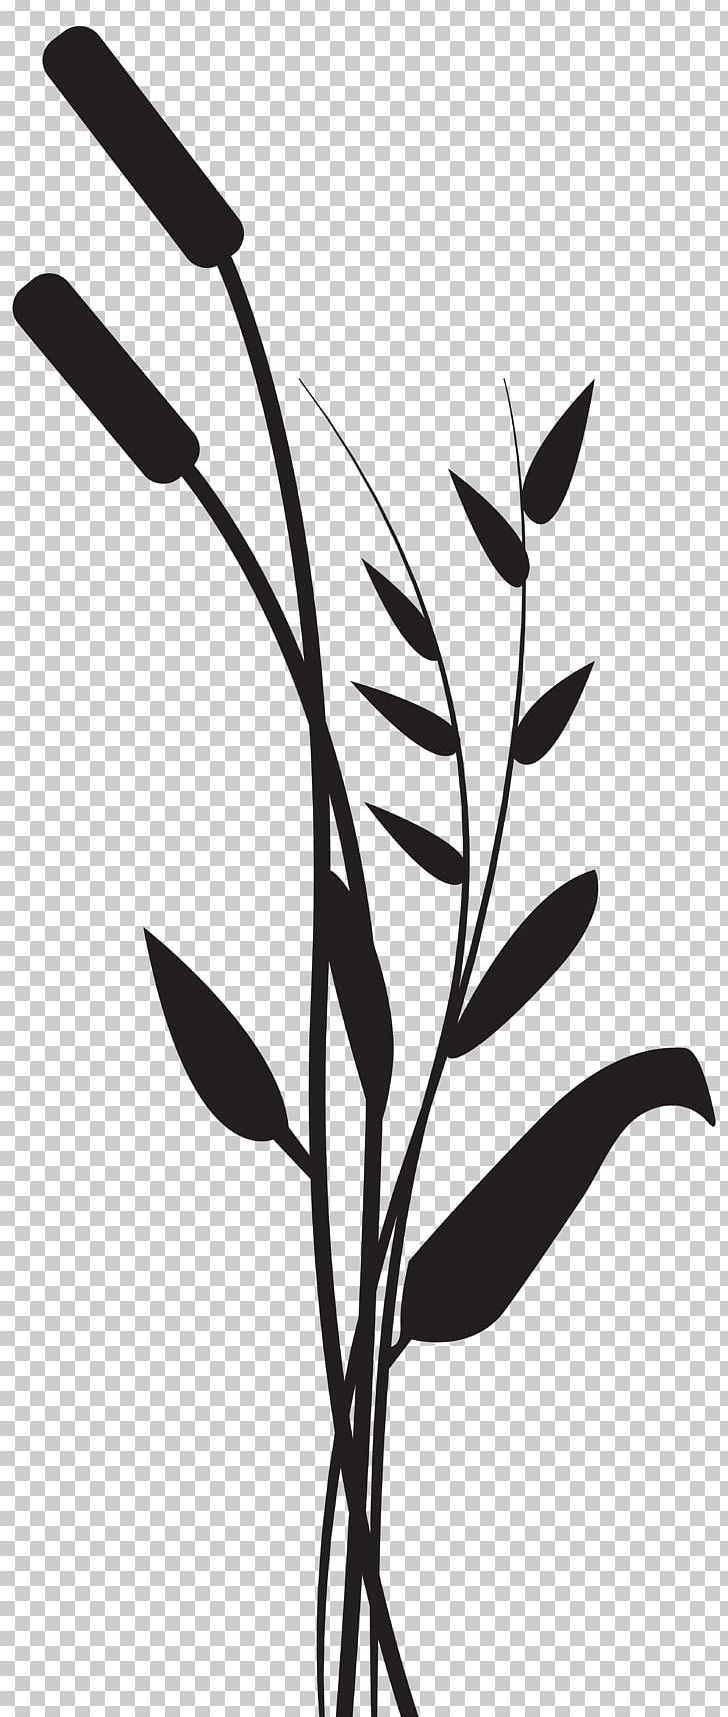 Silhouette Stock Photography PNG, Clipart, Black And White, Branch, Bulrush, Clipart, Contour Free PNG Download